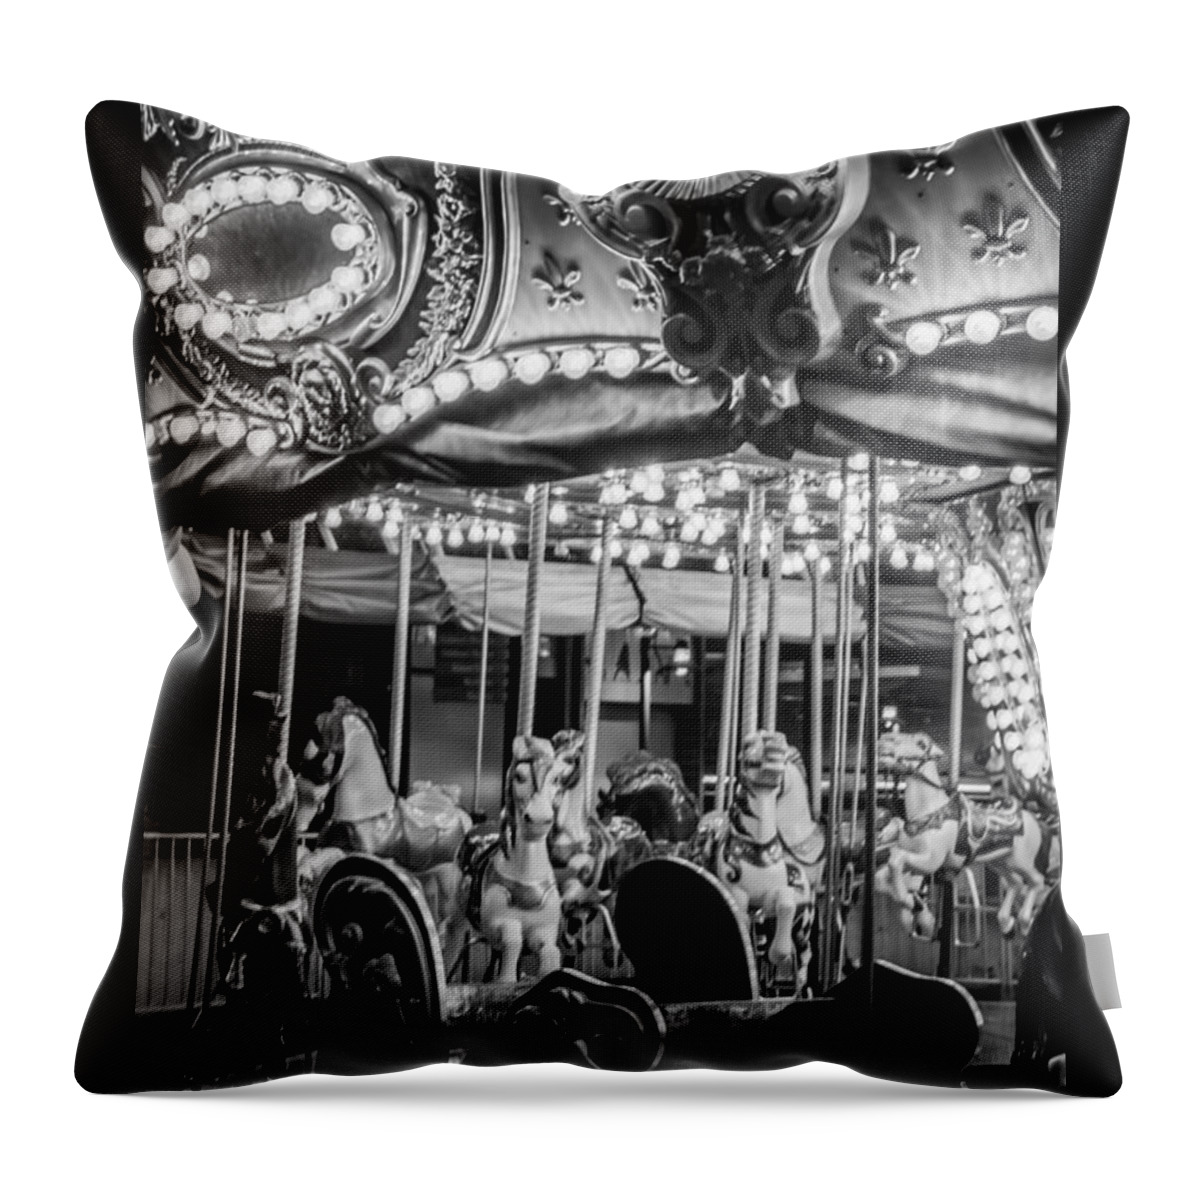 2008 Throw Pillow featuring the photograph Round We Go by Melinda Ledsome